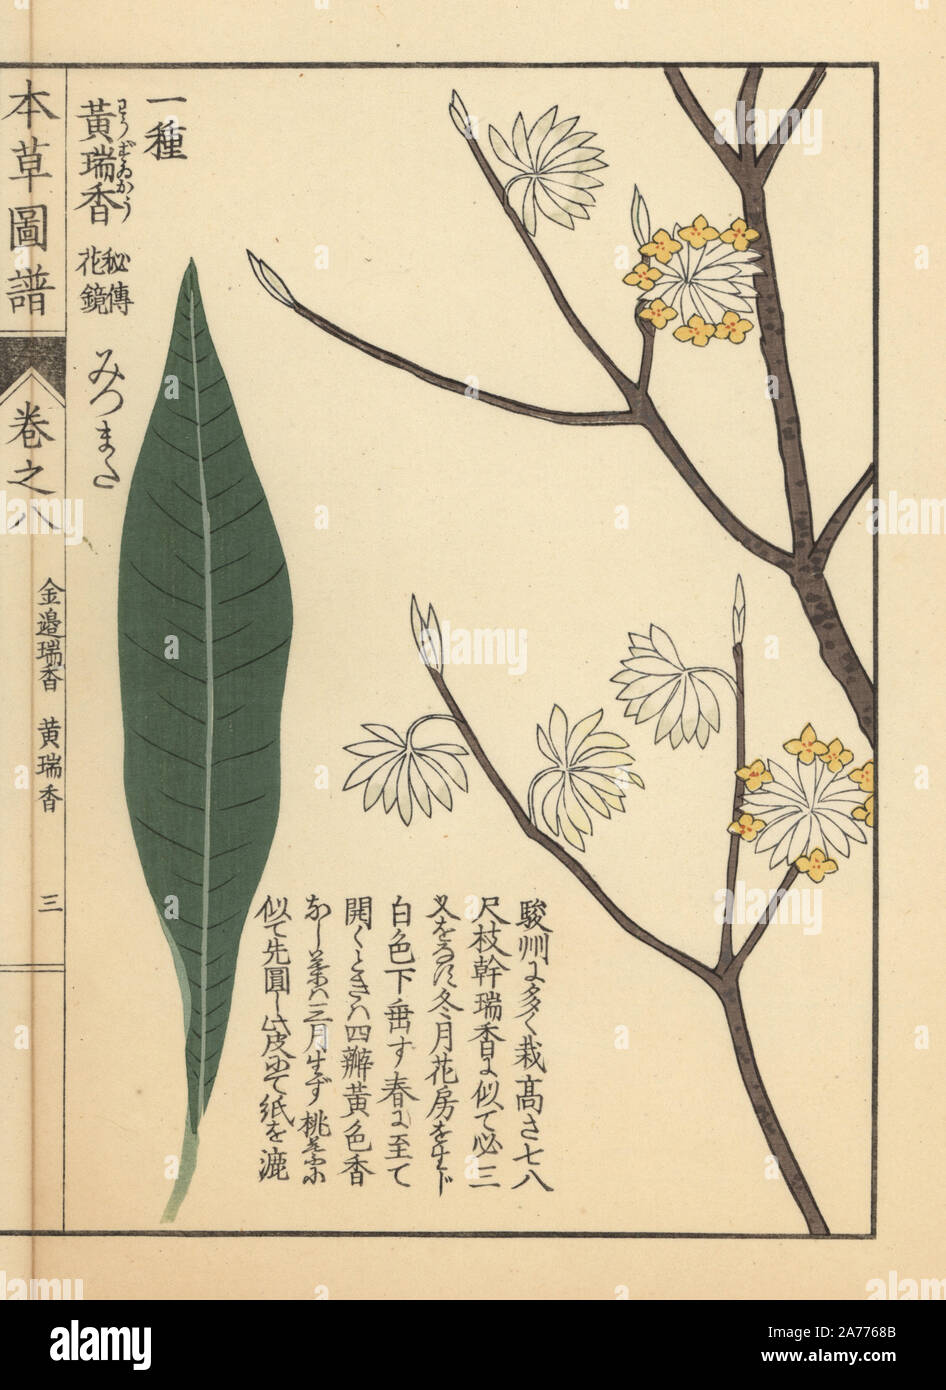 Oriental paperbush or mitsumata, Edgeworthia chrysantha Lindl. Used for Japanese paper. Colour-printed woodblock engraving by Kan'en Iwasaki from 'Honzo Zufu,' an Illustrated Guide to Medicinal Plants, Japan, 1884. Iwasaki (1786-1842) was a Japanese botanist, entomologist and zoologist. He was one of the first Japanese botanists to incorporate western knowledge into his studies. Stock Photo